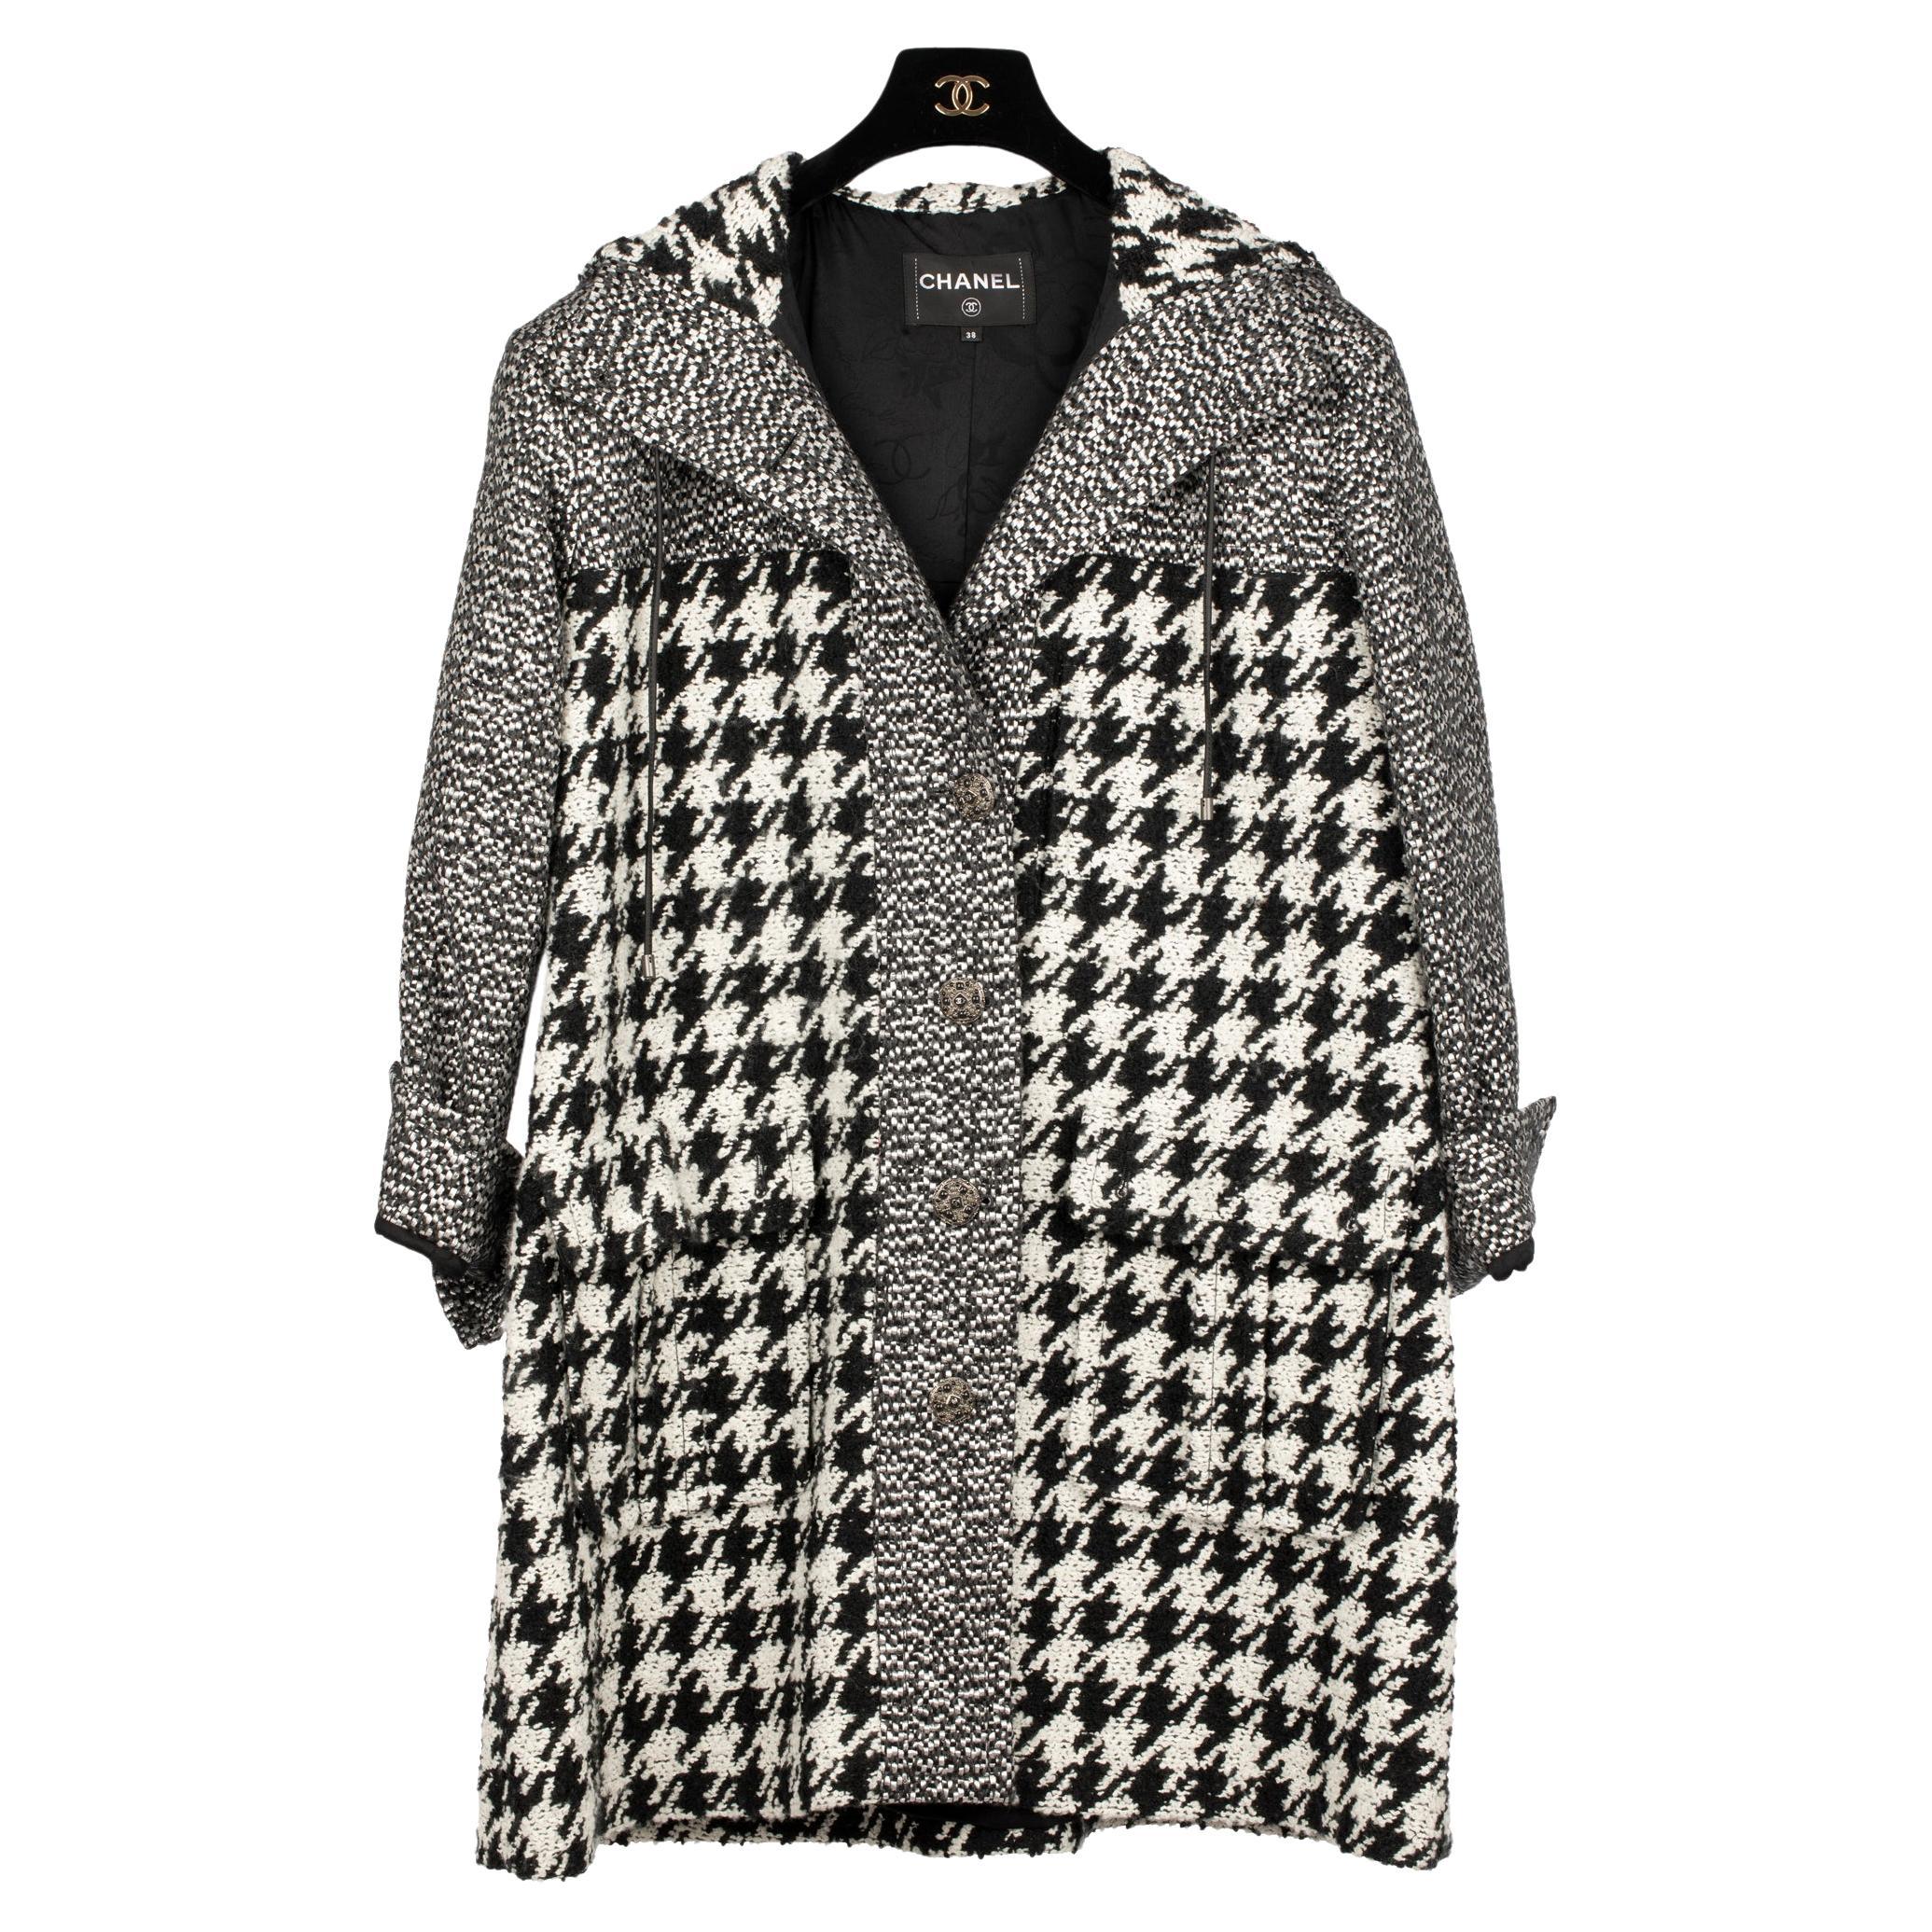 Chanel Black & White Oversized Houndstooth Coat With Hood 38 FR